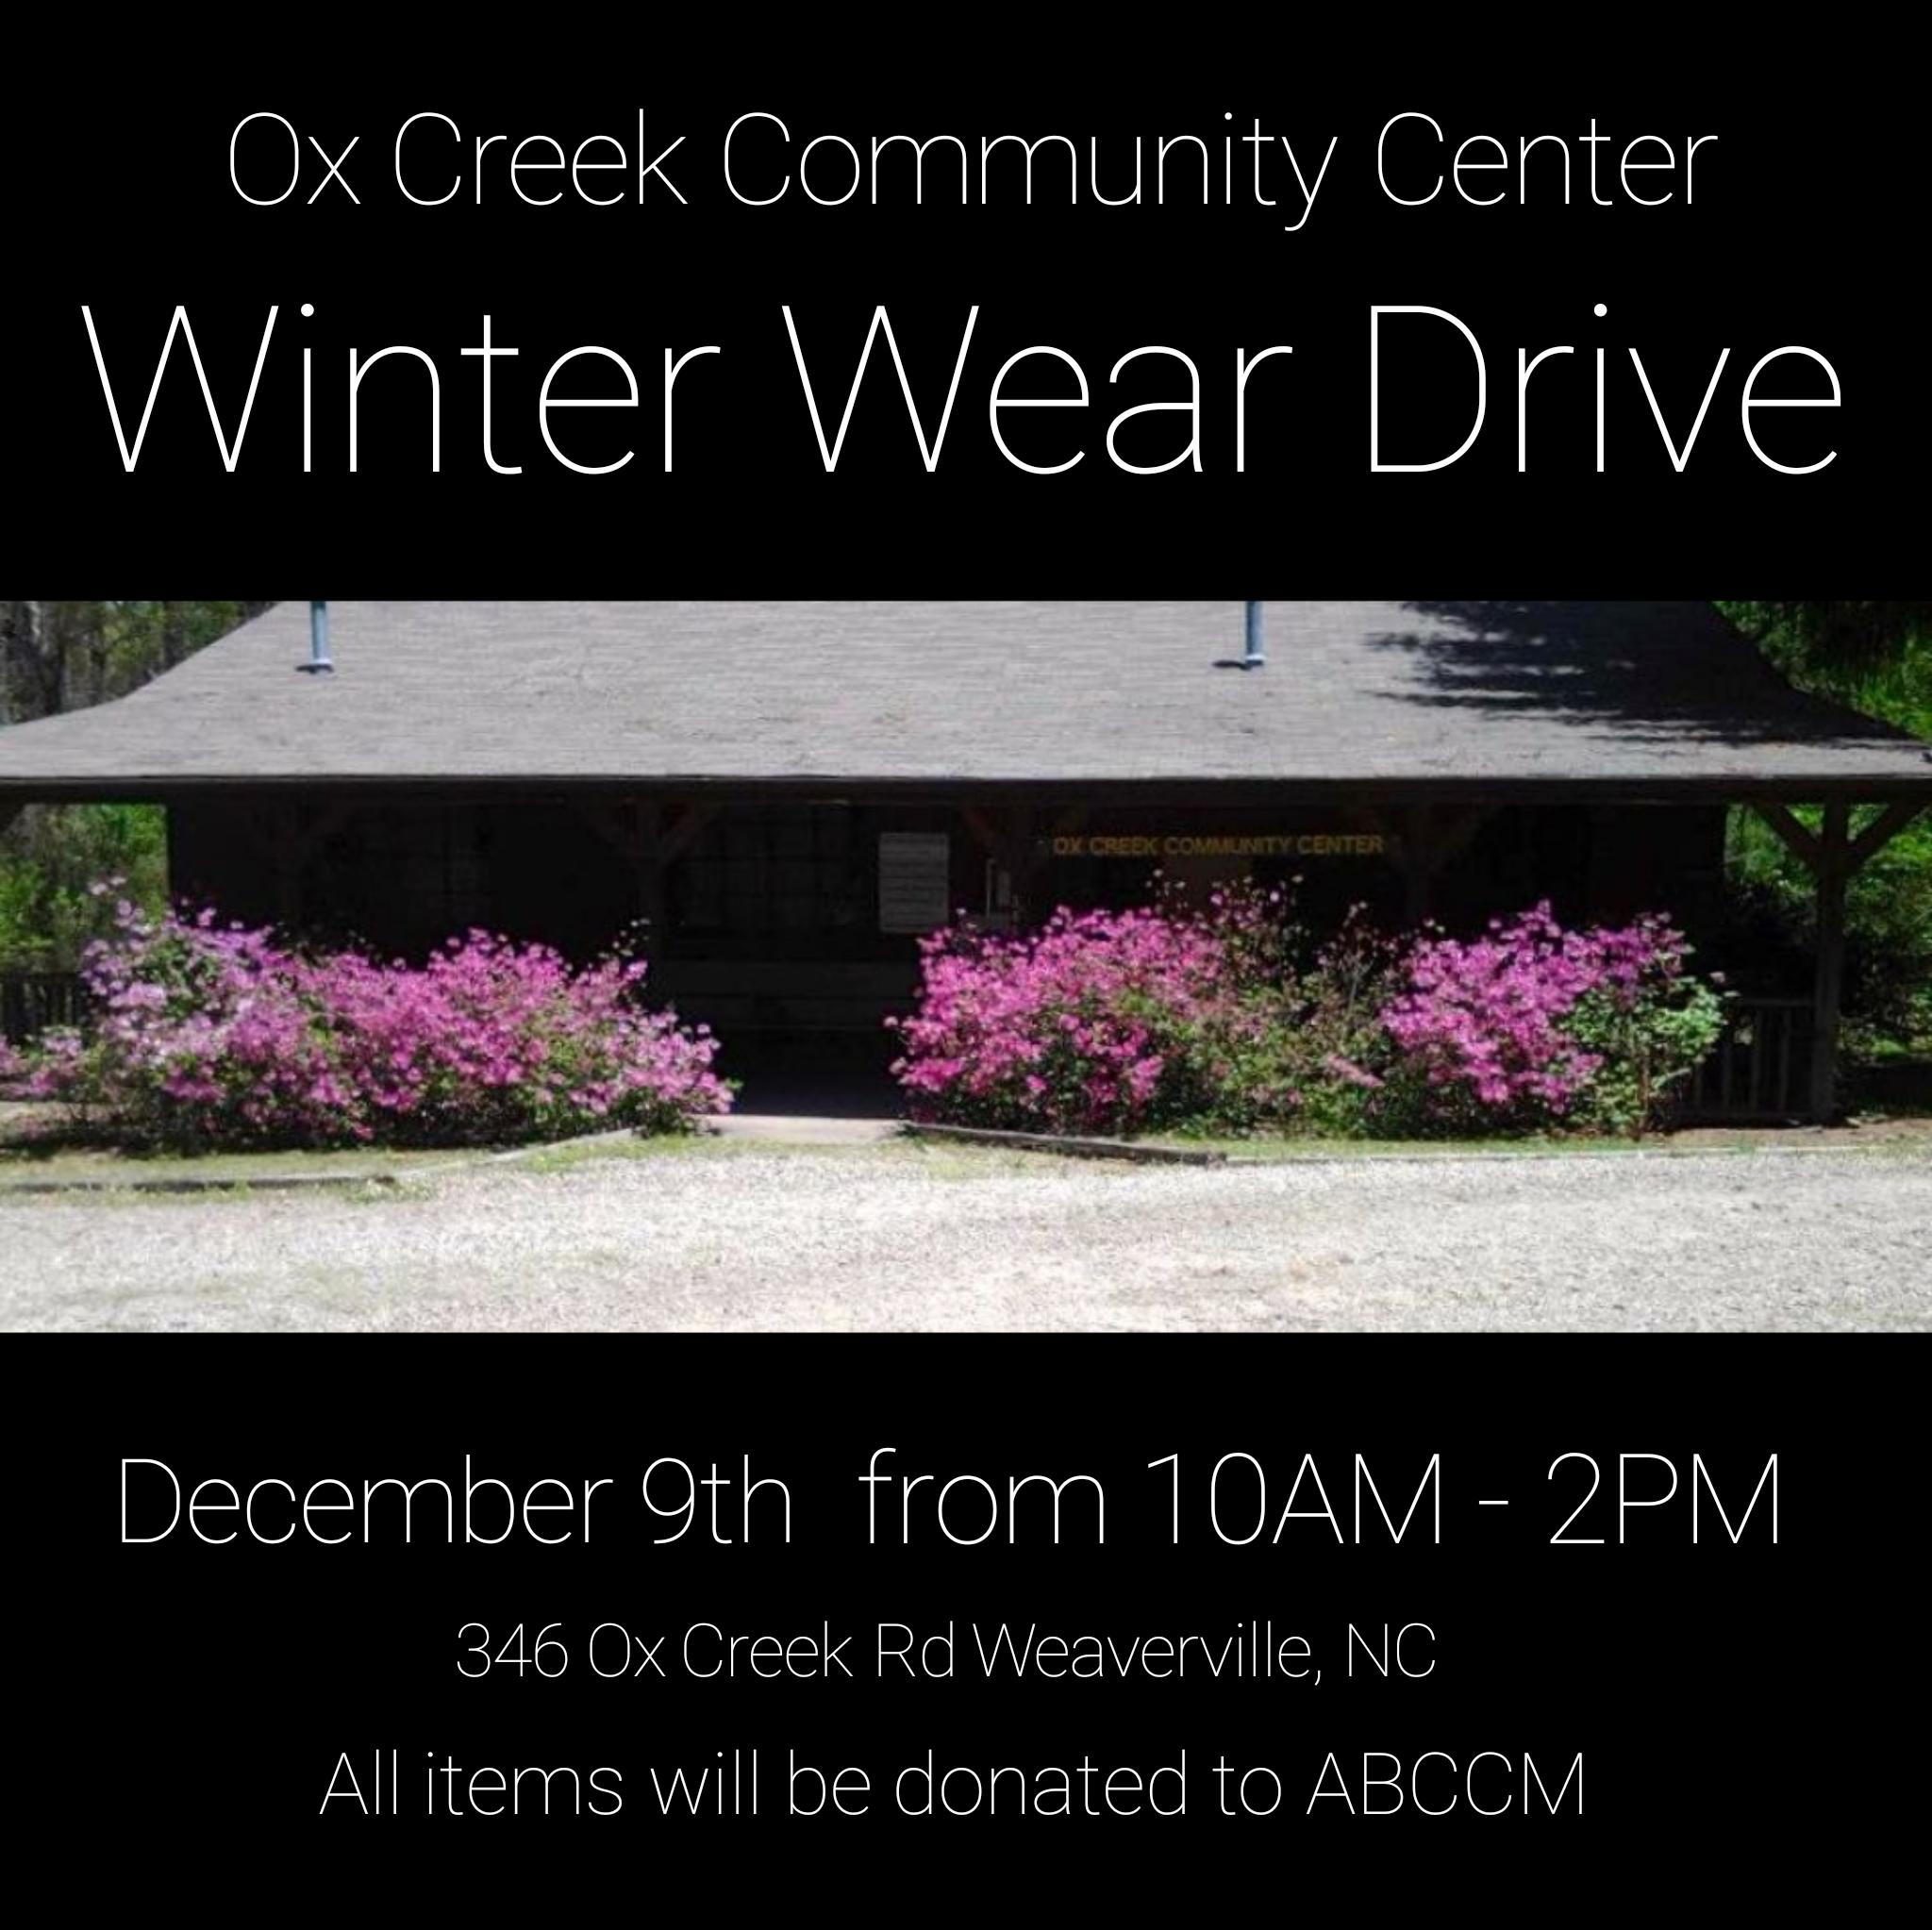 The Ox Creek Community Center will be accepting coats, jackets, hats, gloves for both children and adults.&nbsp; We are grateful for their support!